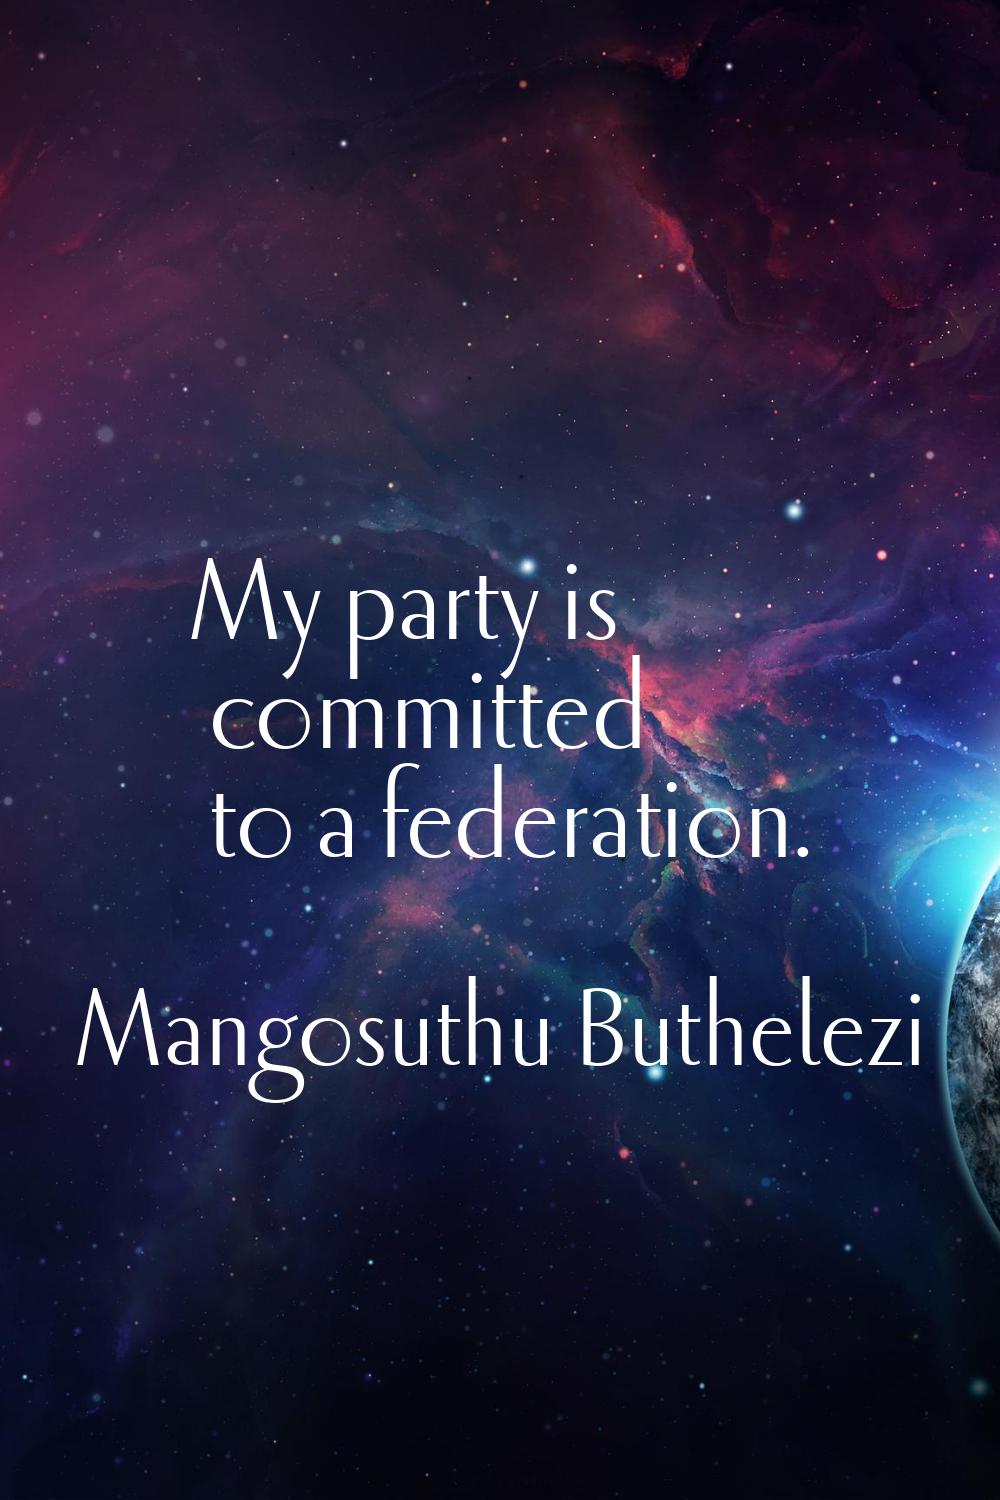 My party is committed to a federation.